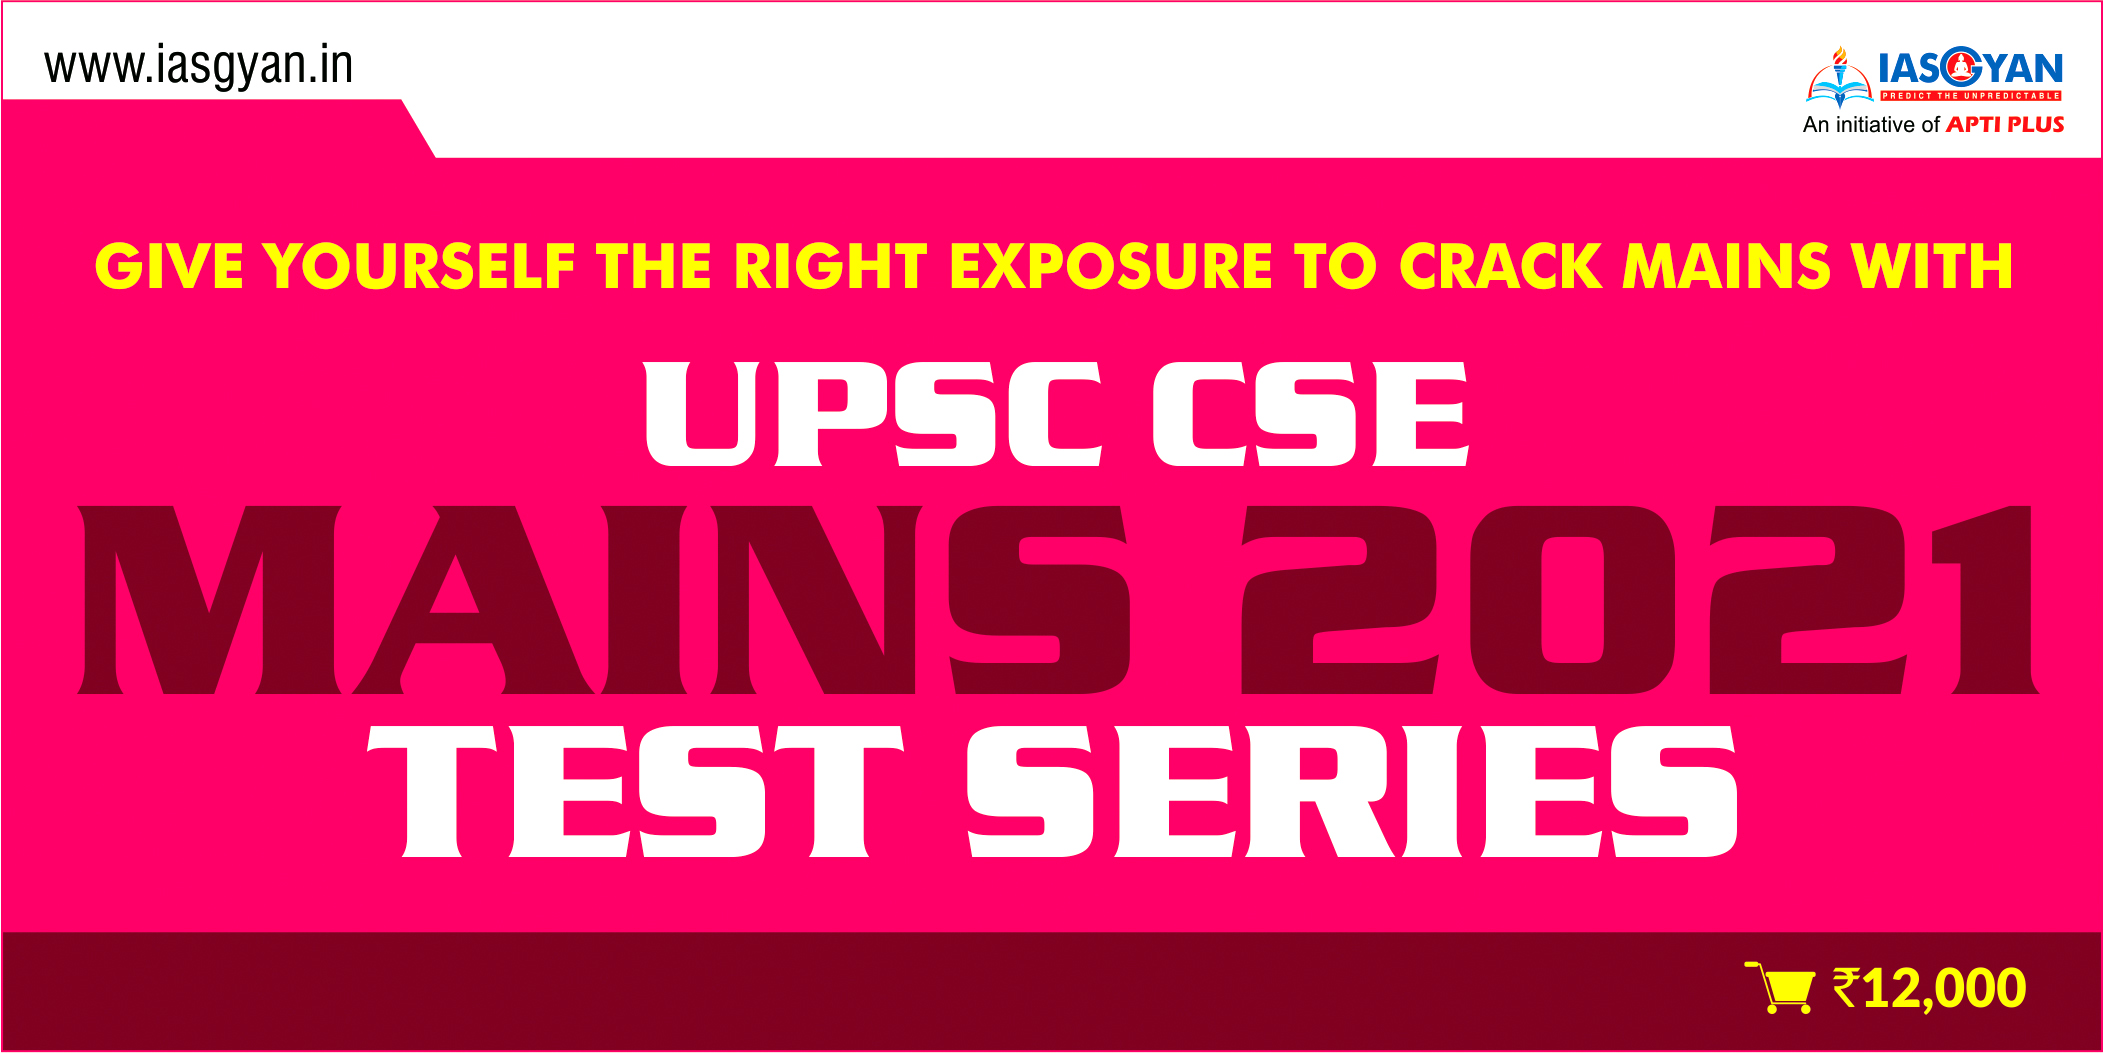 quotes on education for upsc essay